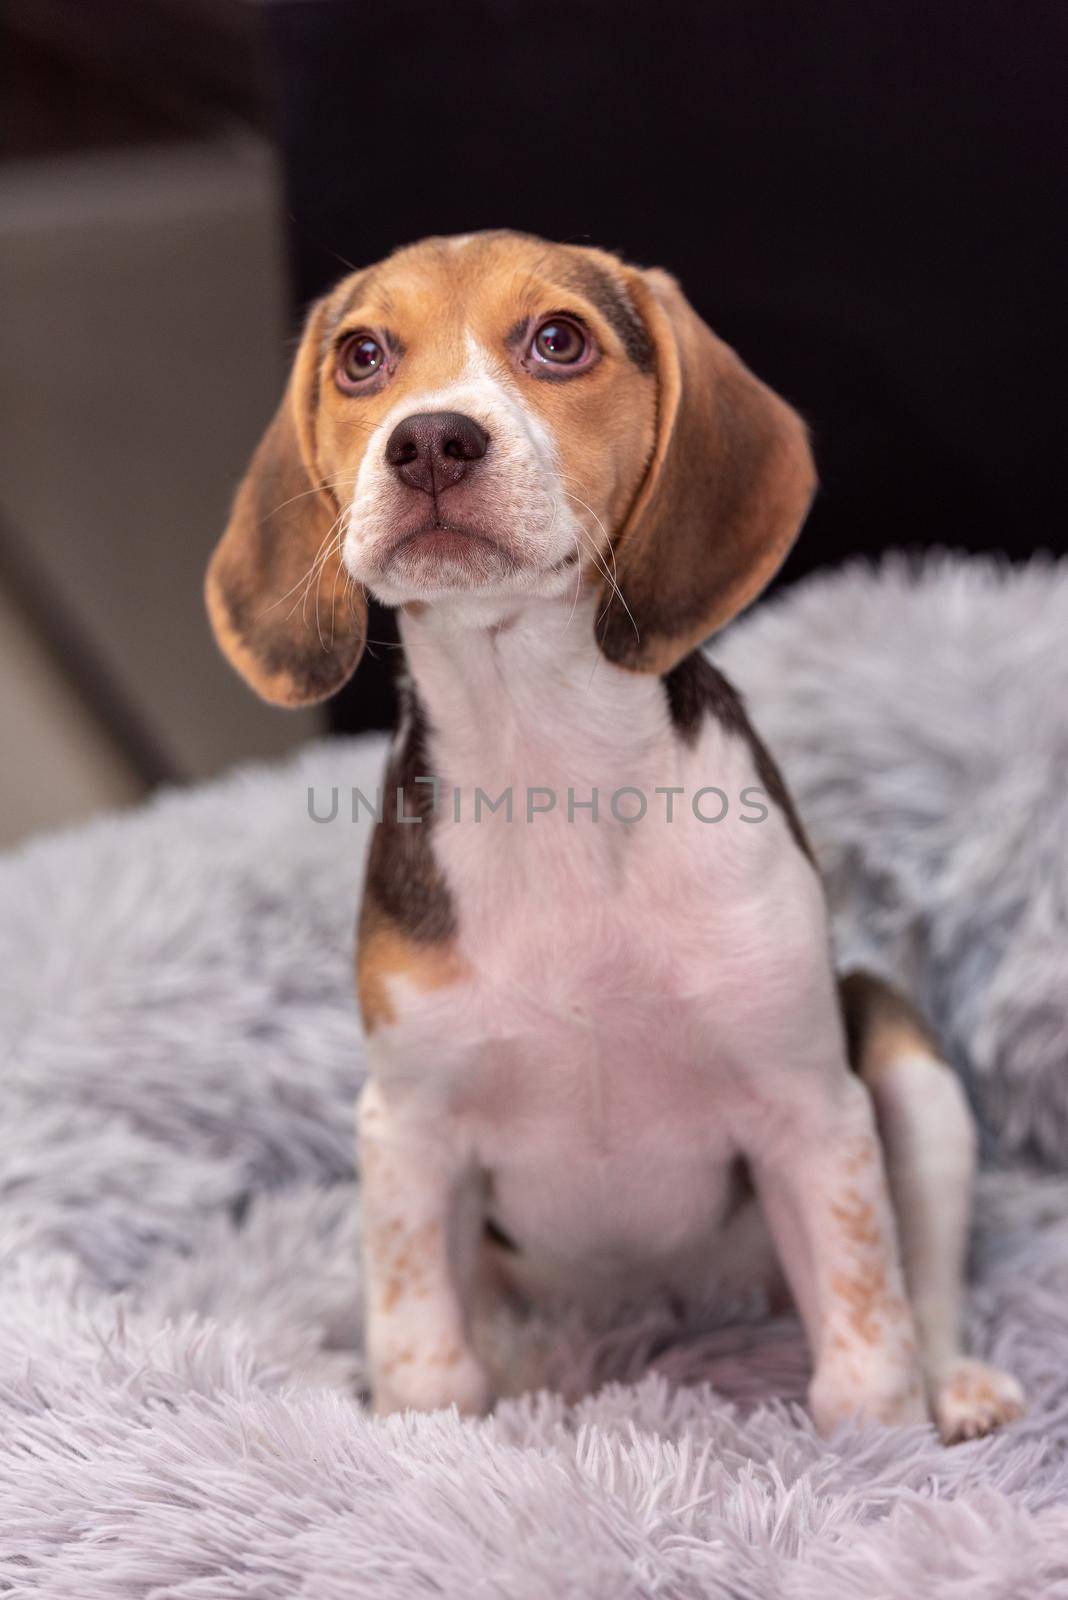 Beagle puppy resting on a couch by martinscphoto